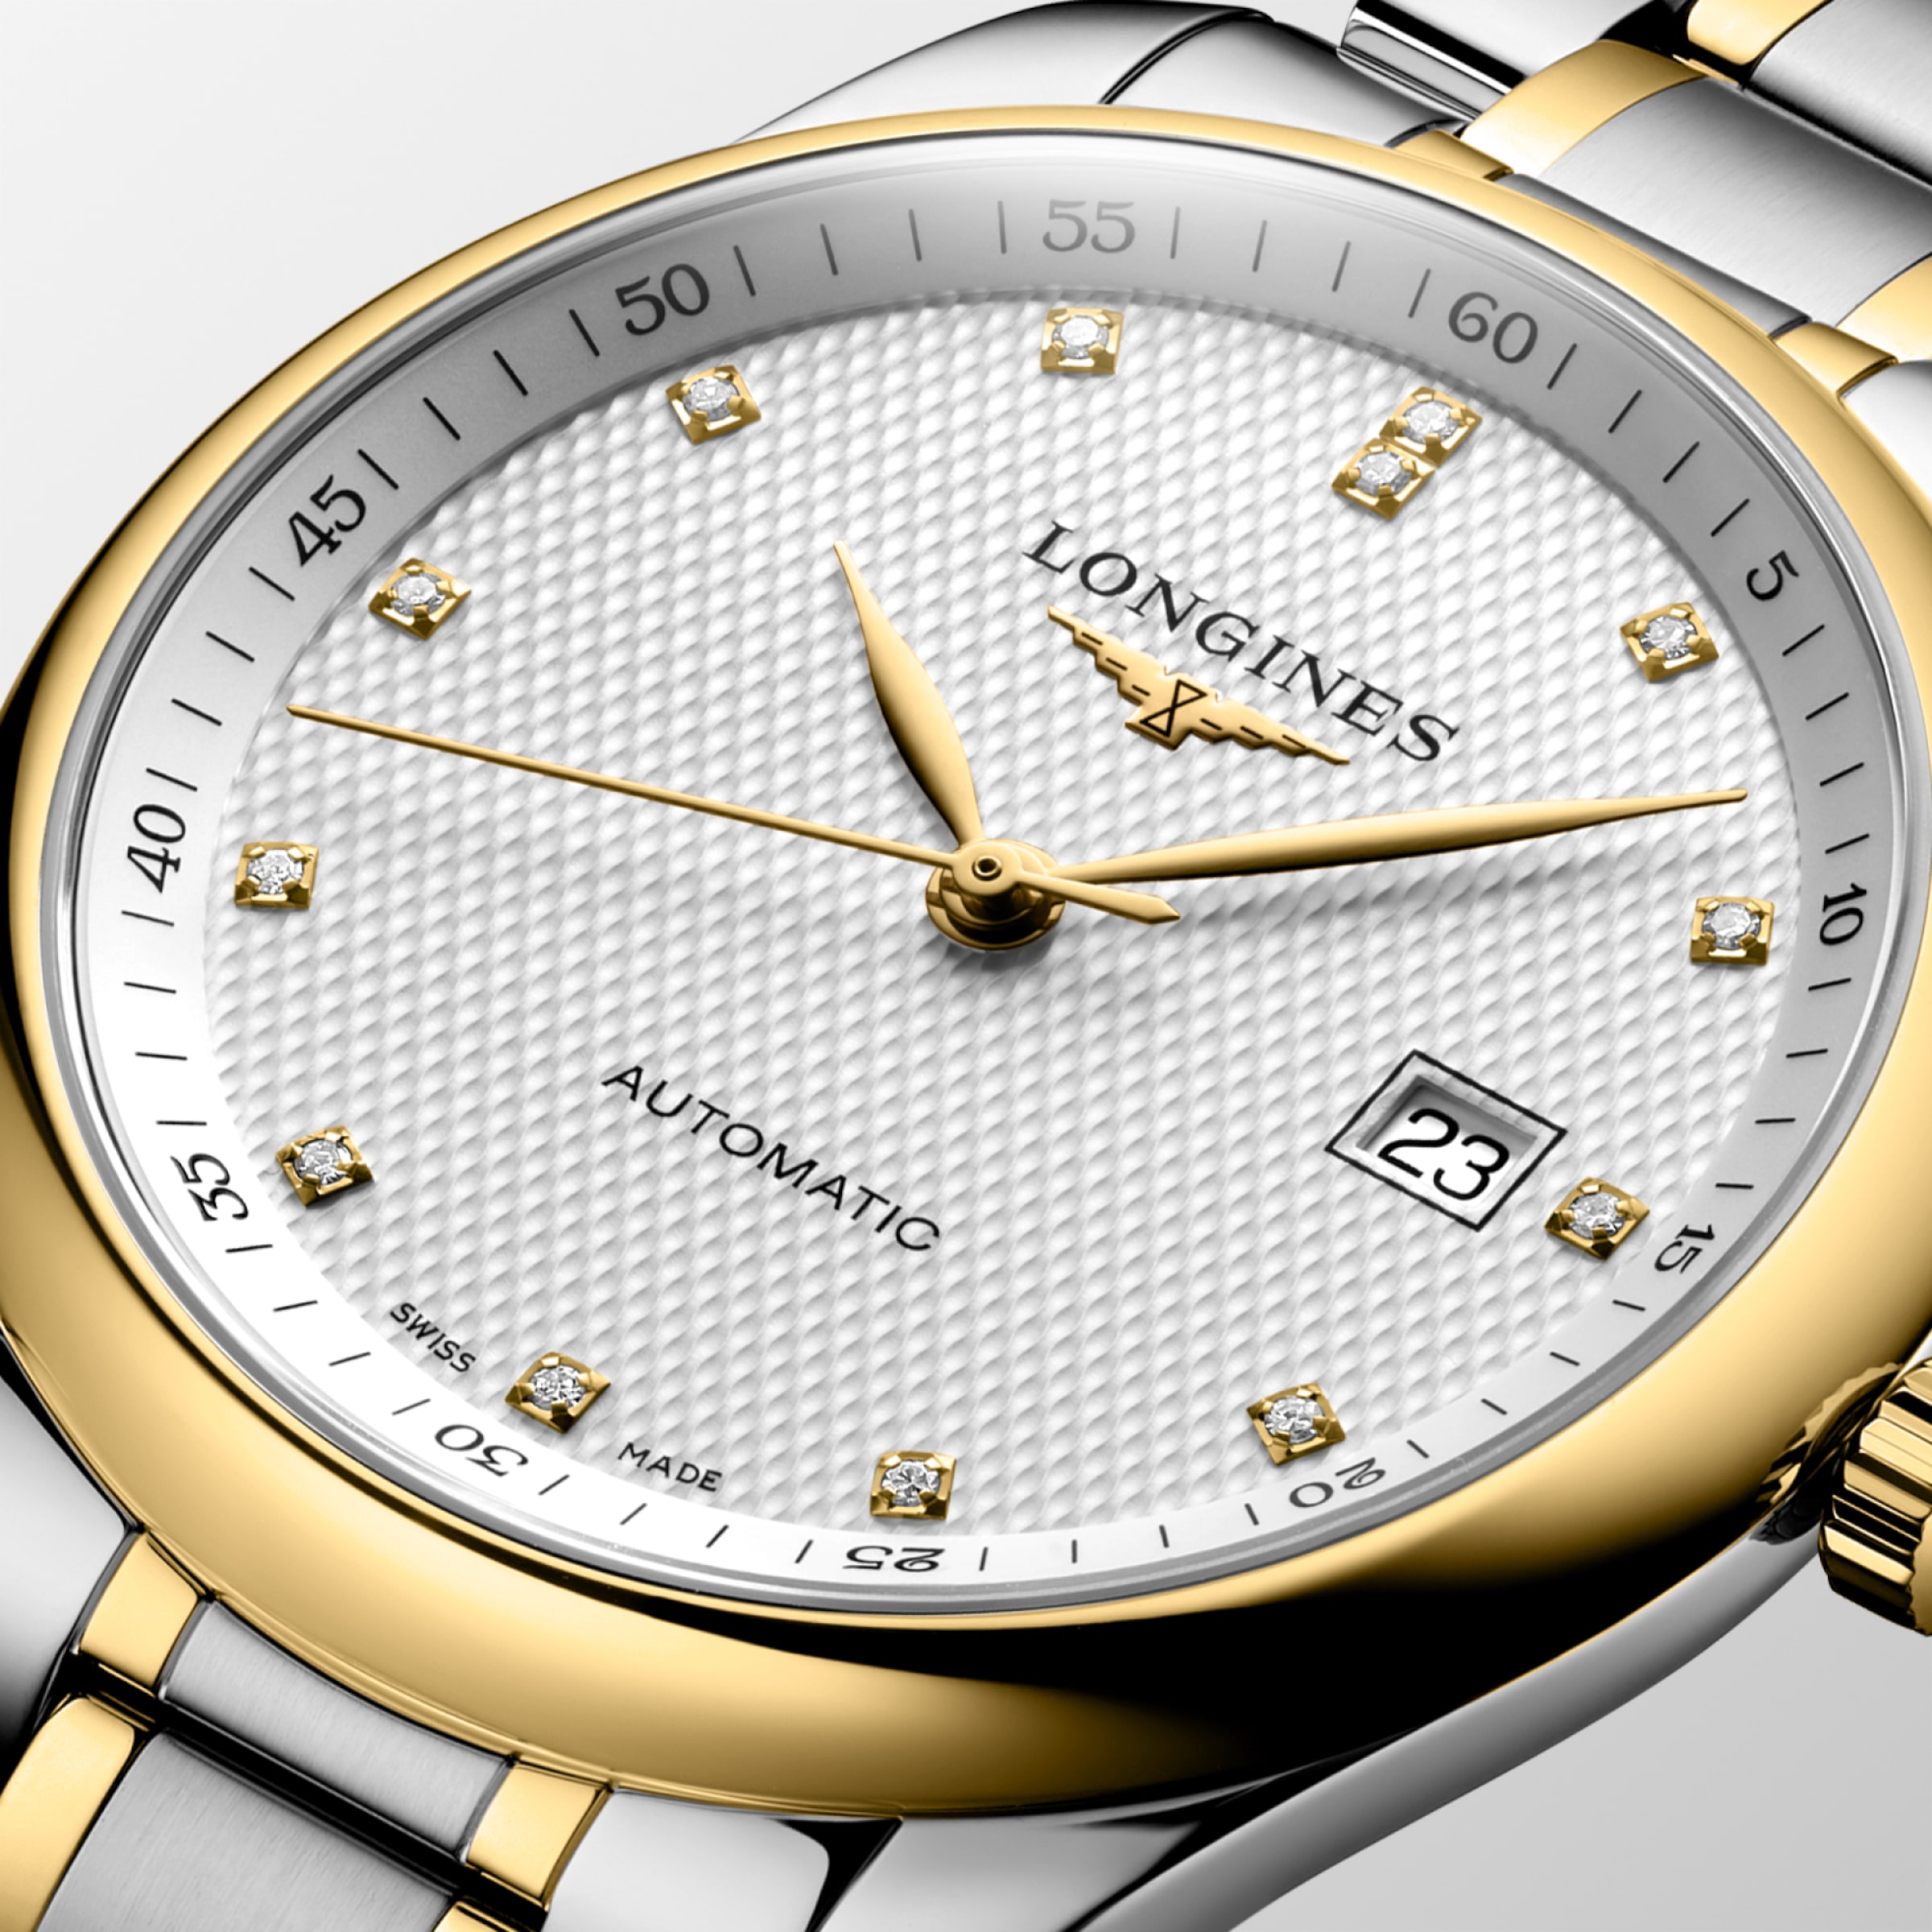 Longines MASTER COLLECTION Automatic Stainless steel and 18 karat yellow gold cap 200 Watch - L2.793.5.97.7